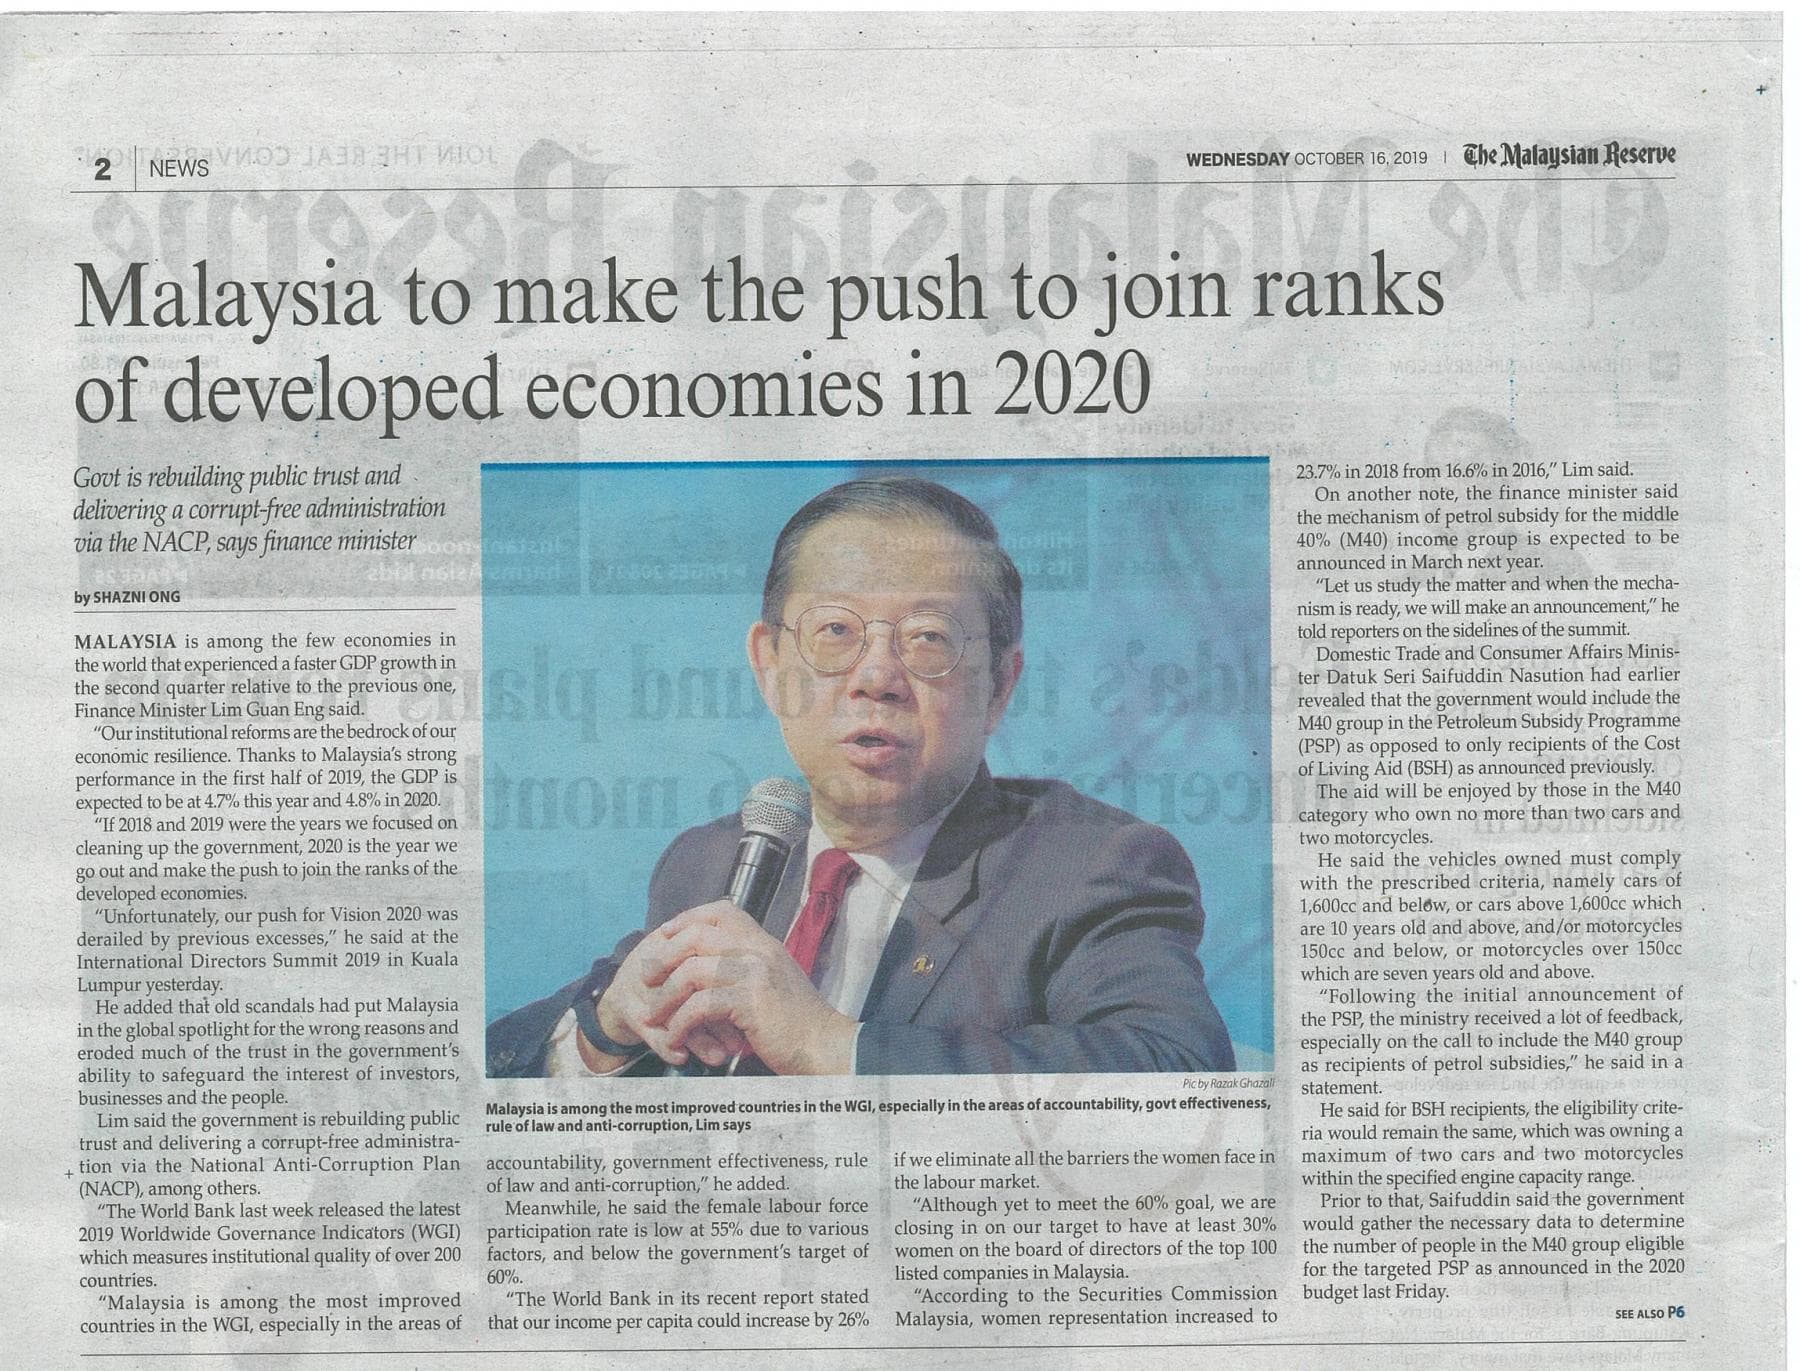 The Malaysian Reserve Malaysia to make the push to join ranks of developed economies in 2020 16 Oct 2019